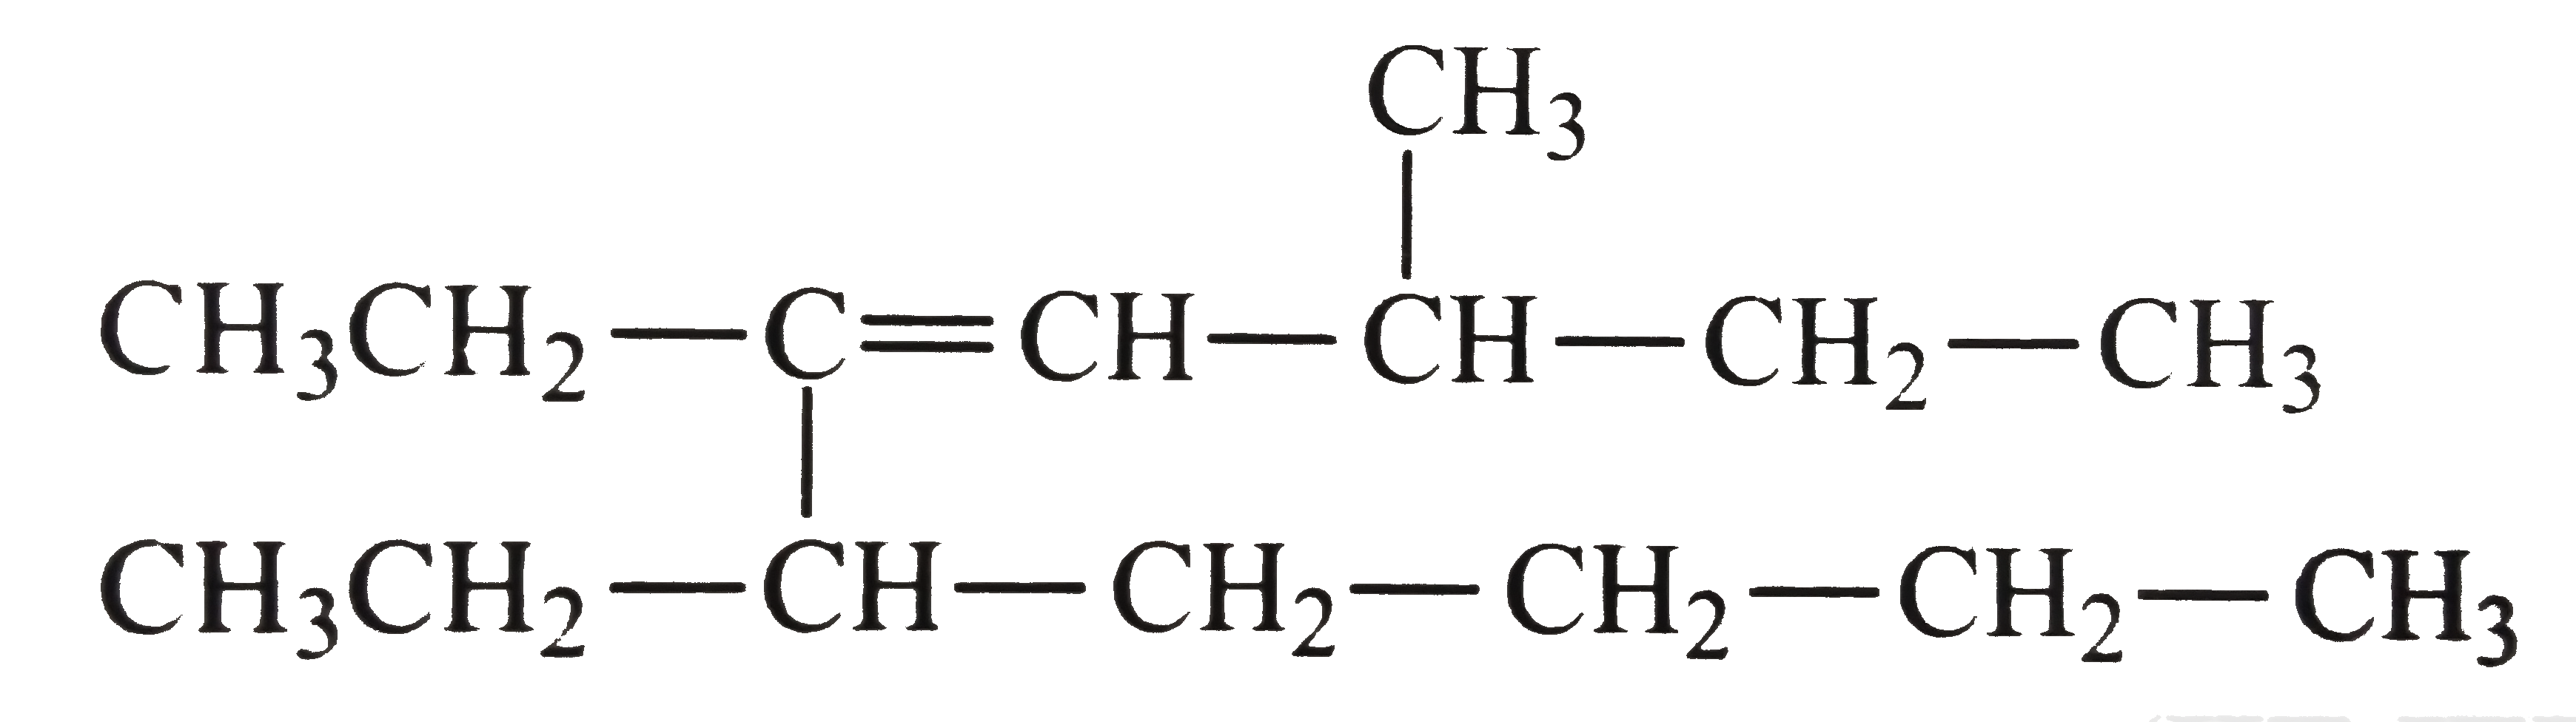 The correct IUPAC name of the compound is: